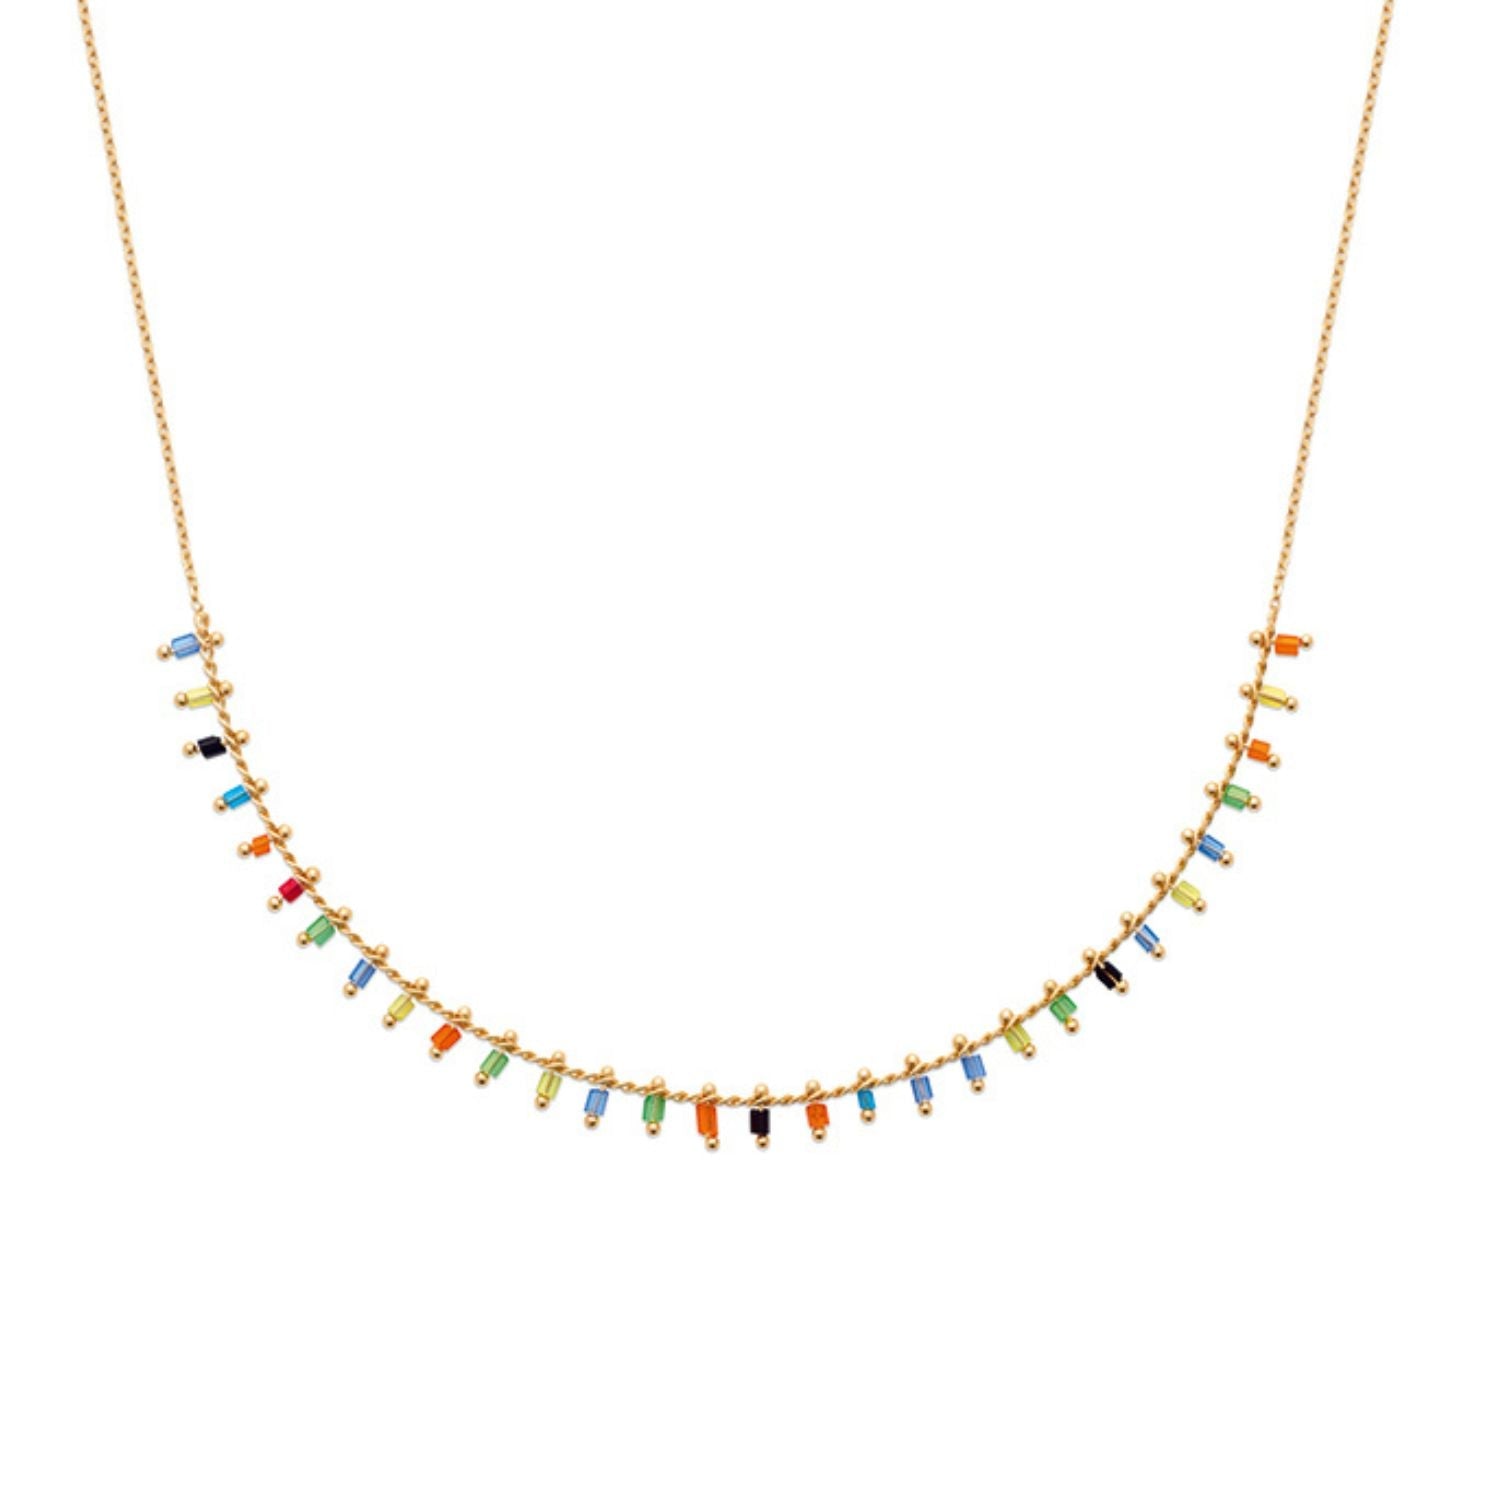 18ct Gold Plated Colourful Vibrant Multi Beaded Necklace